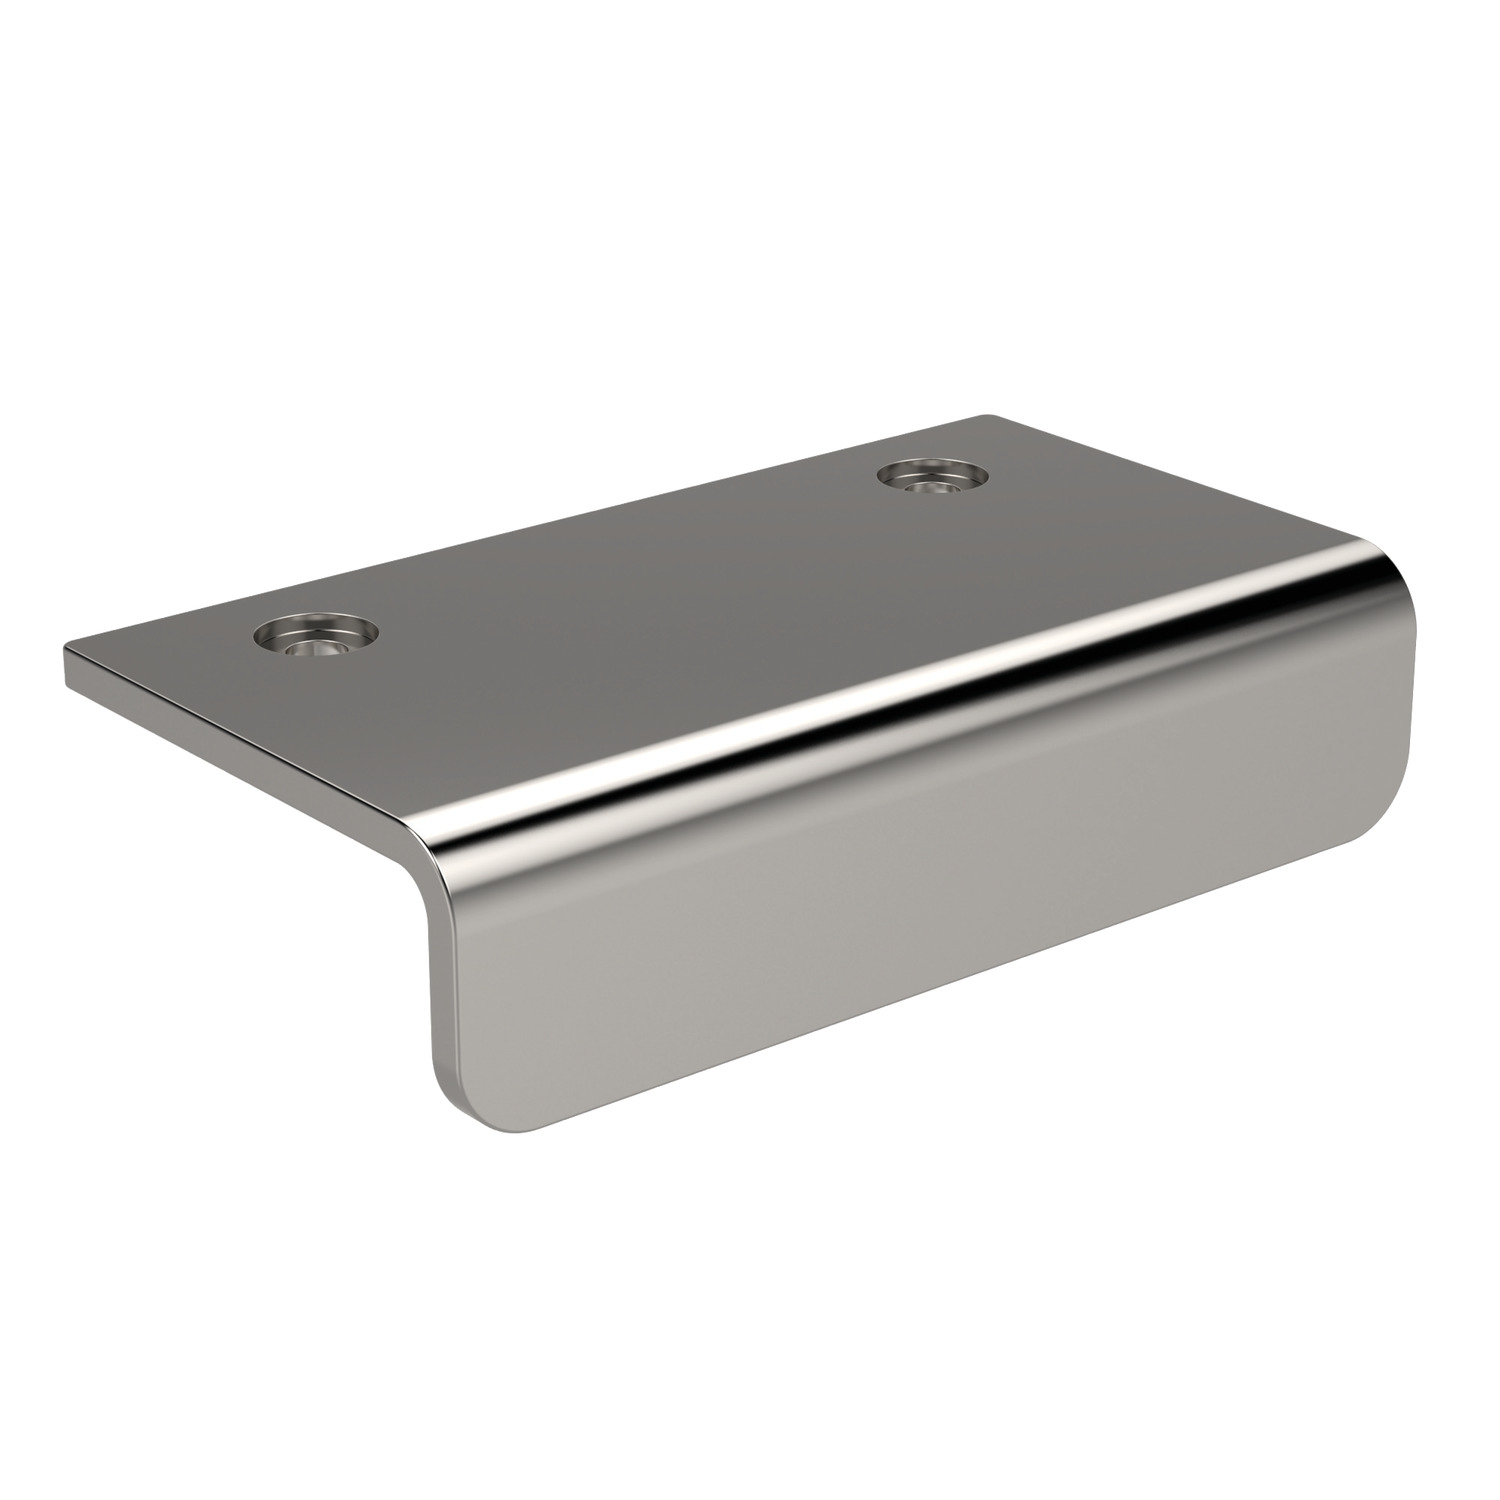 Product 79590, Ledge Pulls stainless steel / 